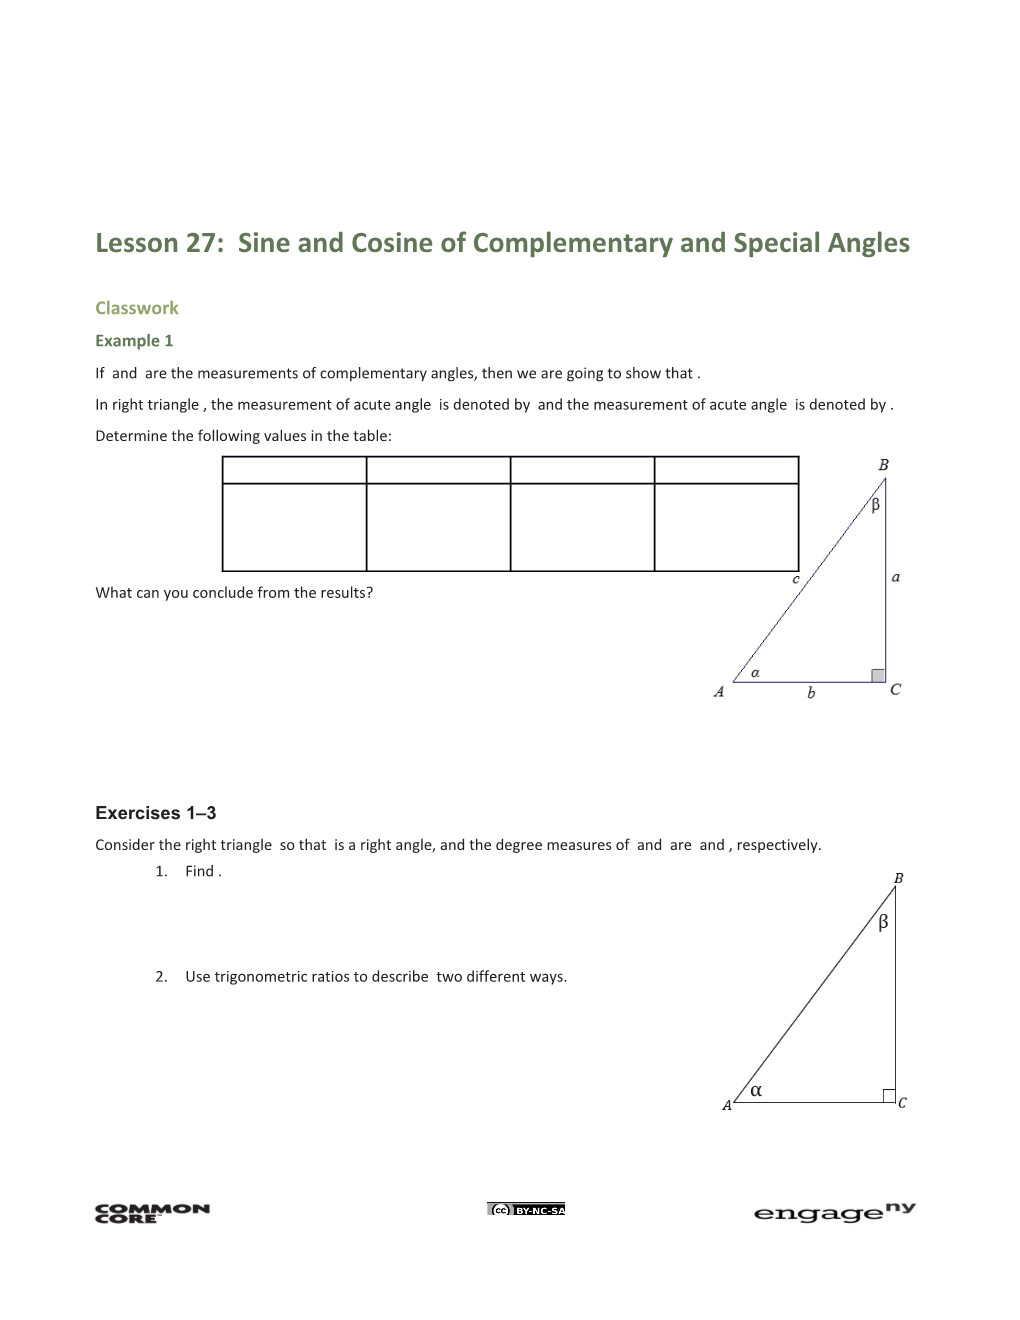 Lesson 27: Sine and Cosine of Complementary and Special Angles